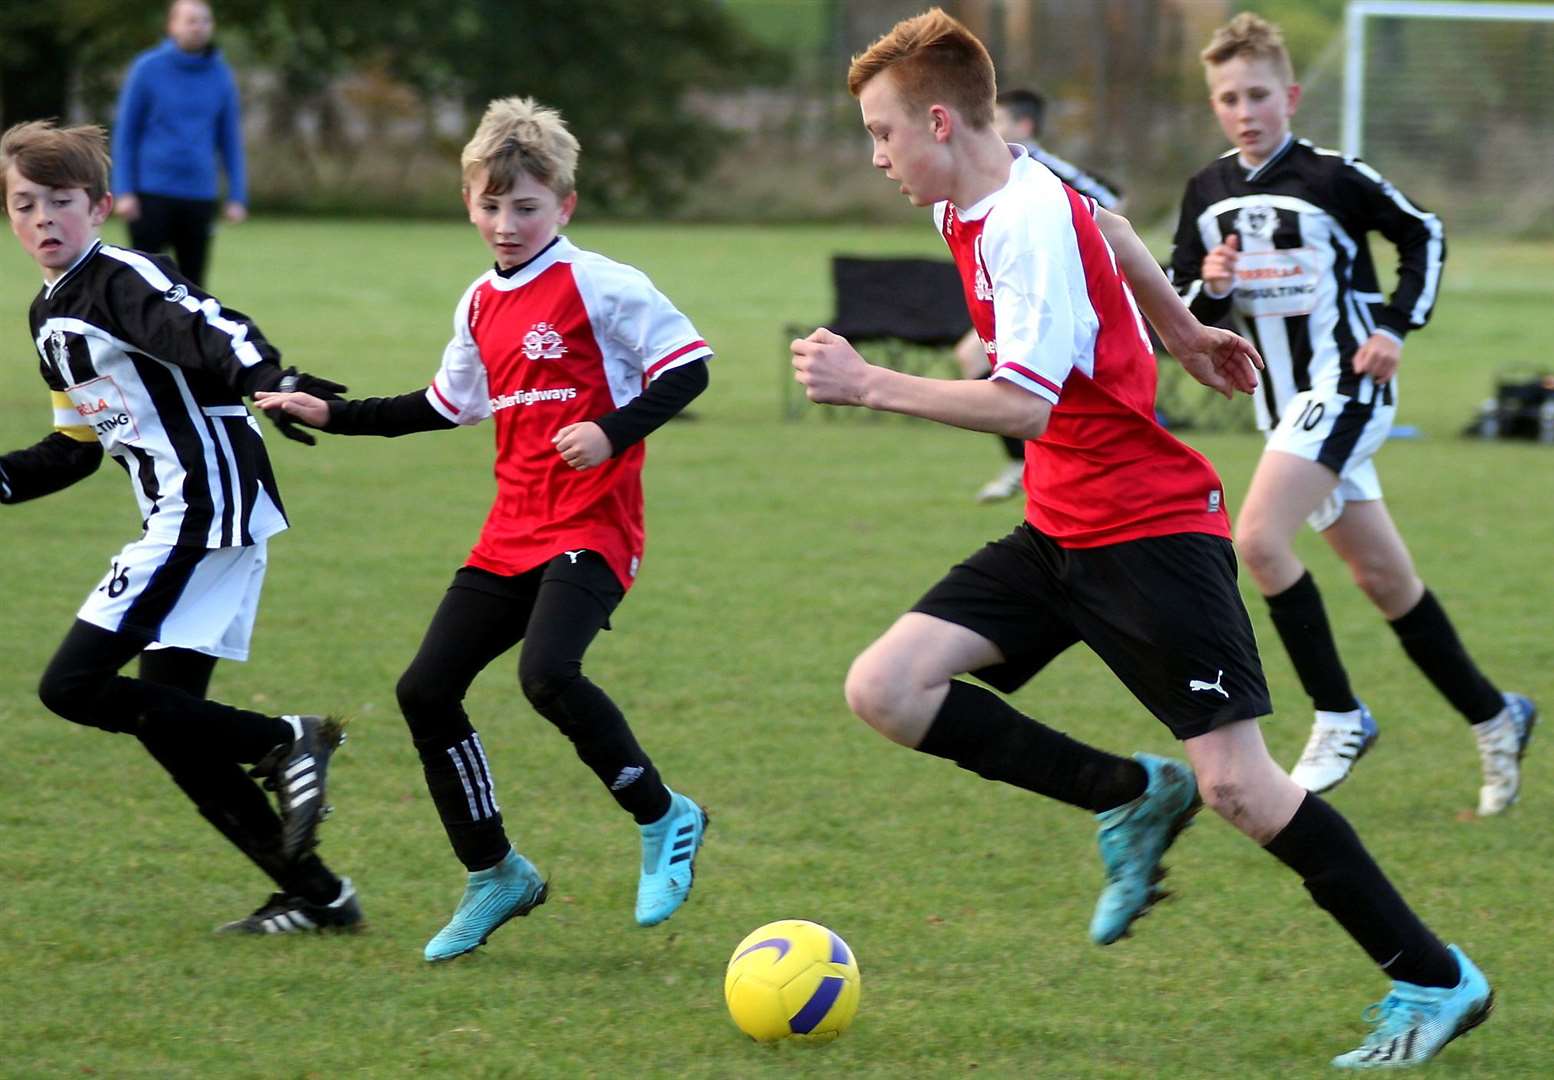 Omega 92 under-13s (red) on the charge against Milton & Fulston United under-13s. Picture: Phil Lee FM21312795